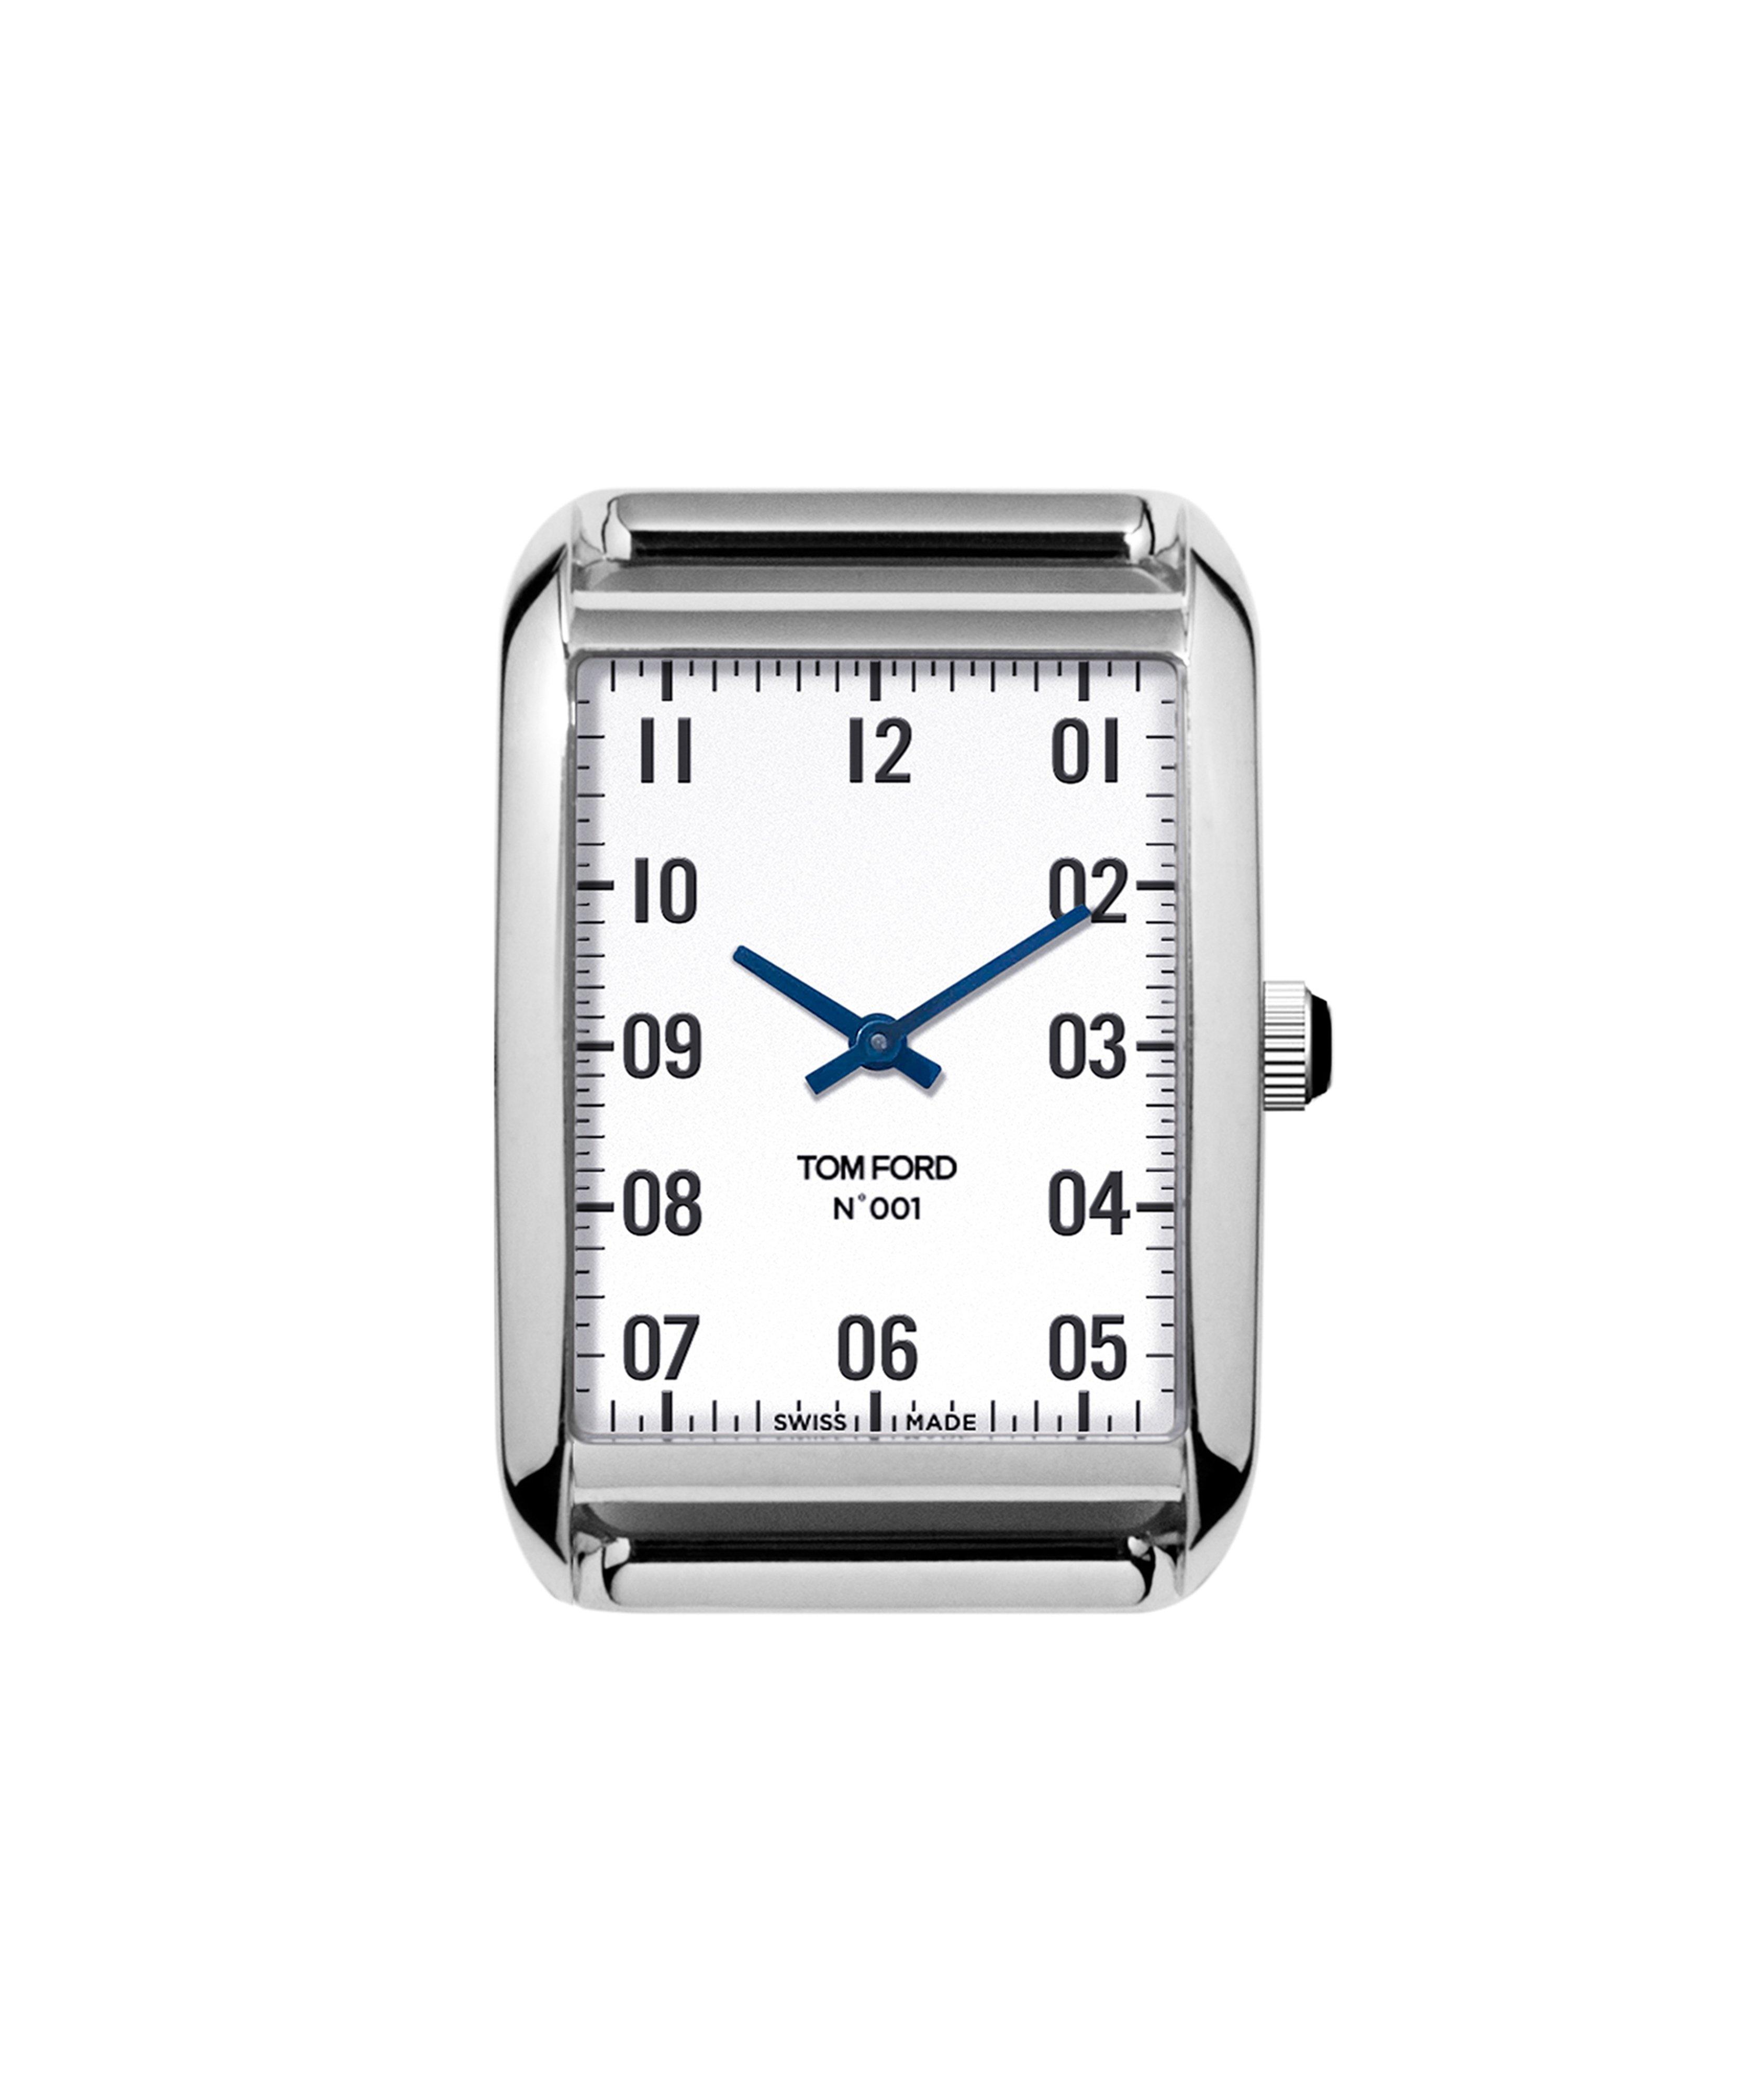 No. 001 Brushed Stainless Steel Interchangeable Watch Face image 0